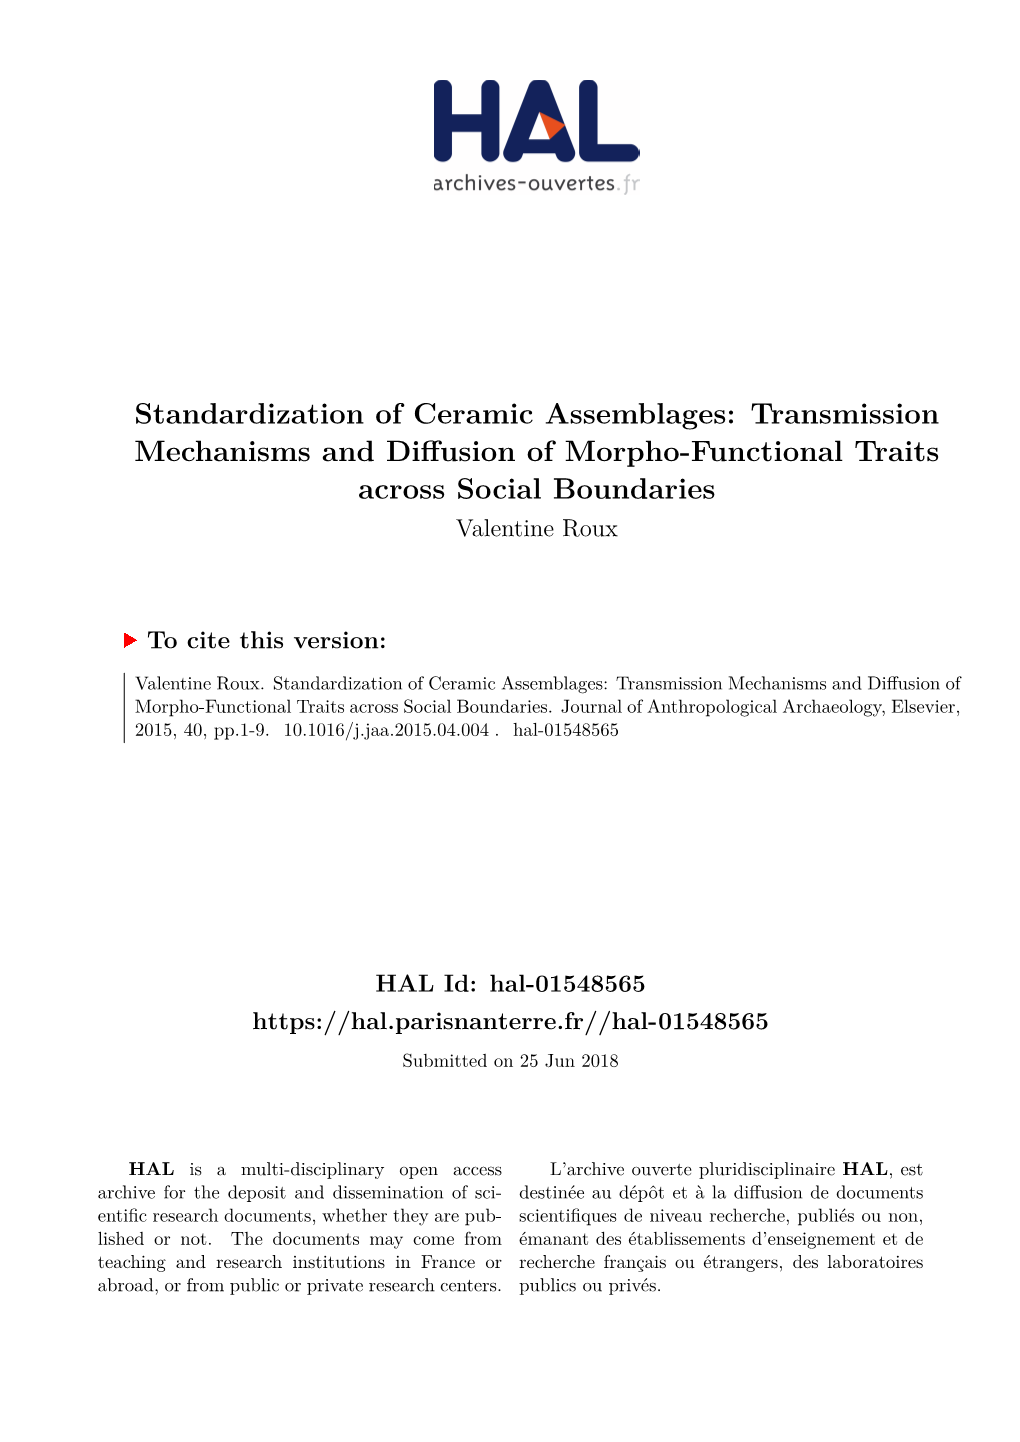 Standardization of Ceramic Assemblages: Transmission Mechanisms and Diffusion of Morpho-Functional Traits Across Social Boundaries Valentine Roux